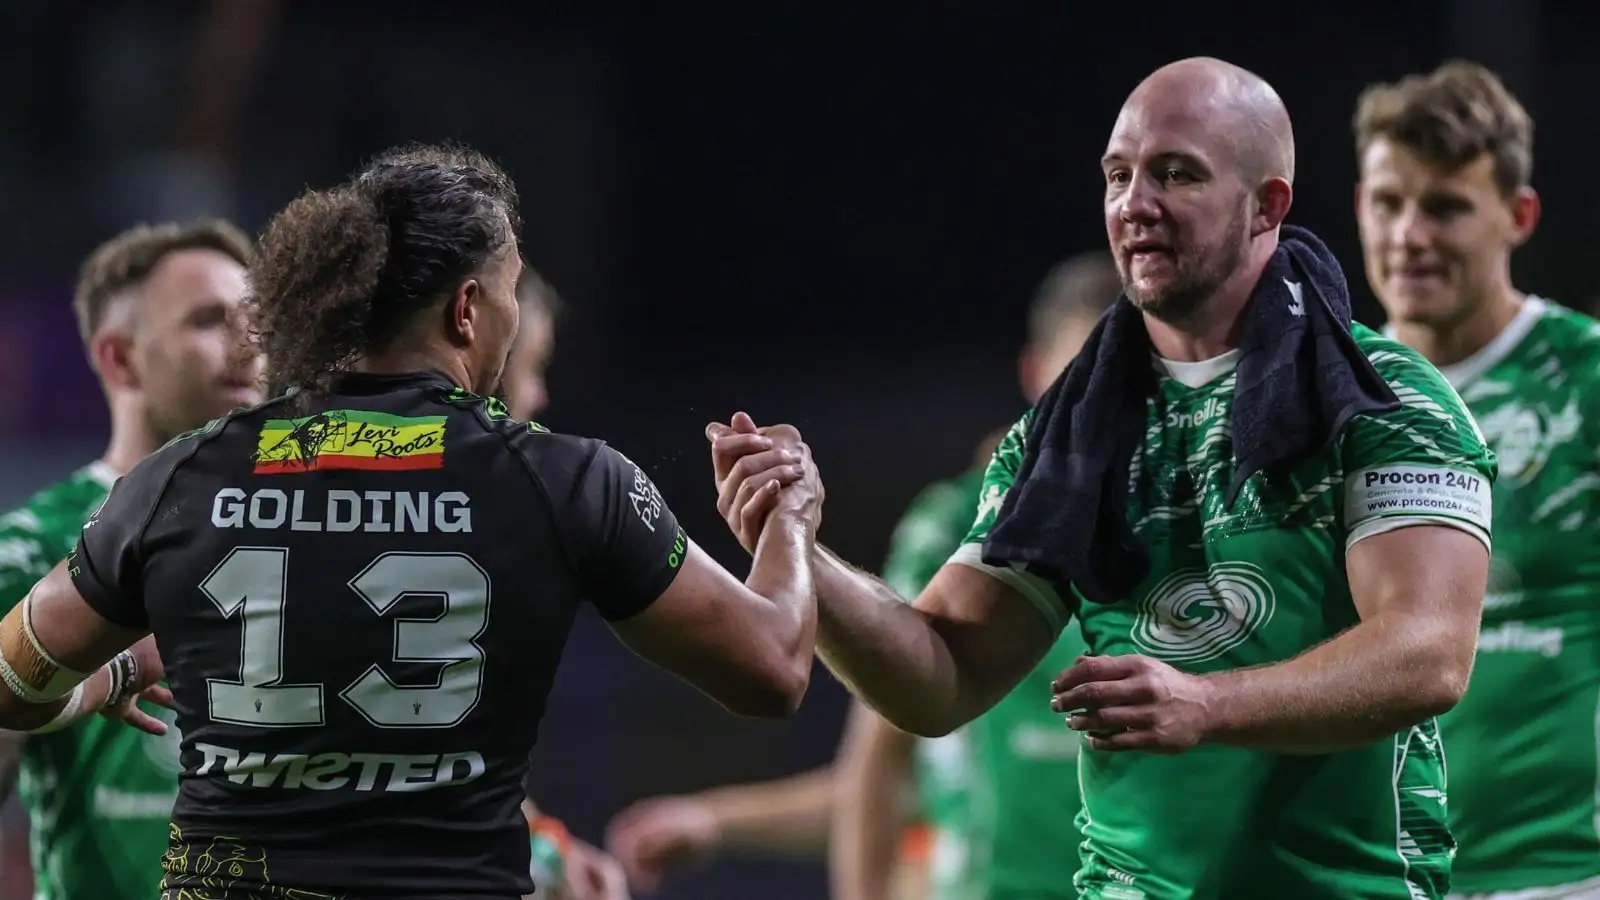 ‘I’m hugely disappointed’ – Ireland captain George King questions downsized Rugby League World Cup format